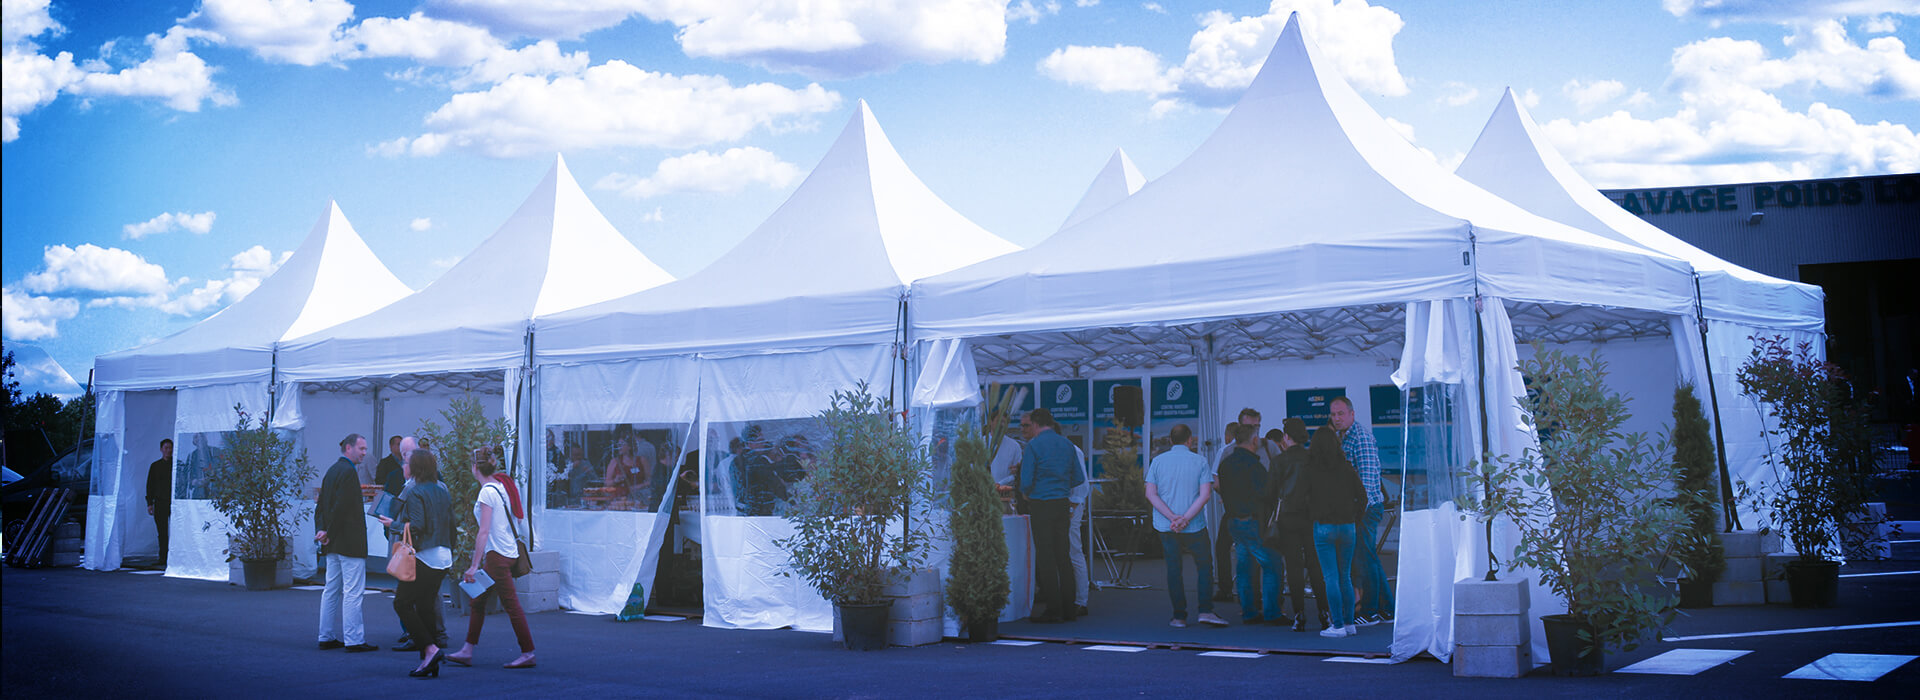 Event marquee